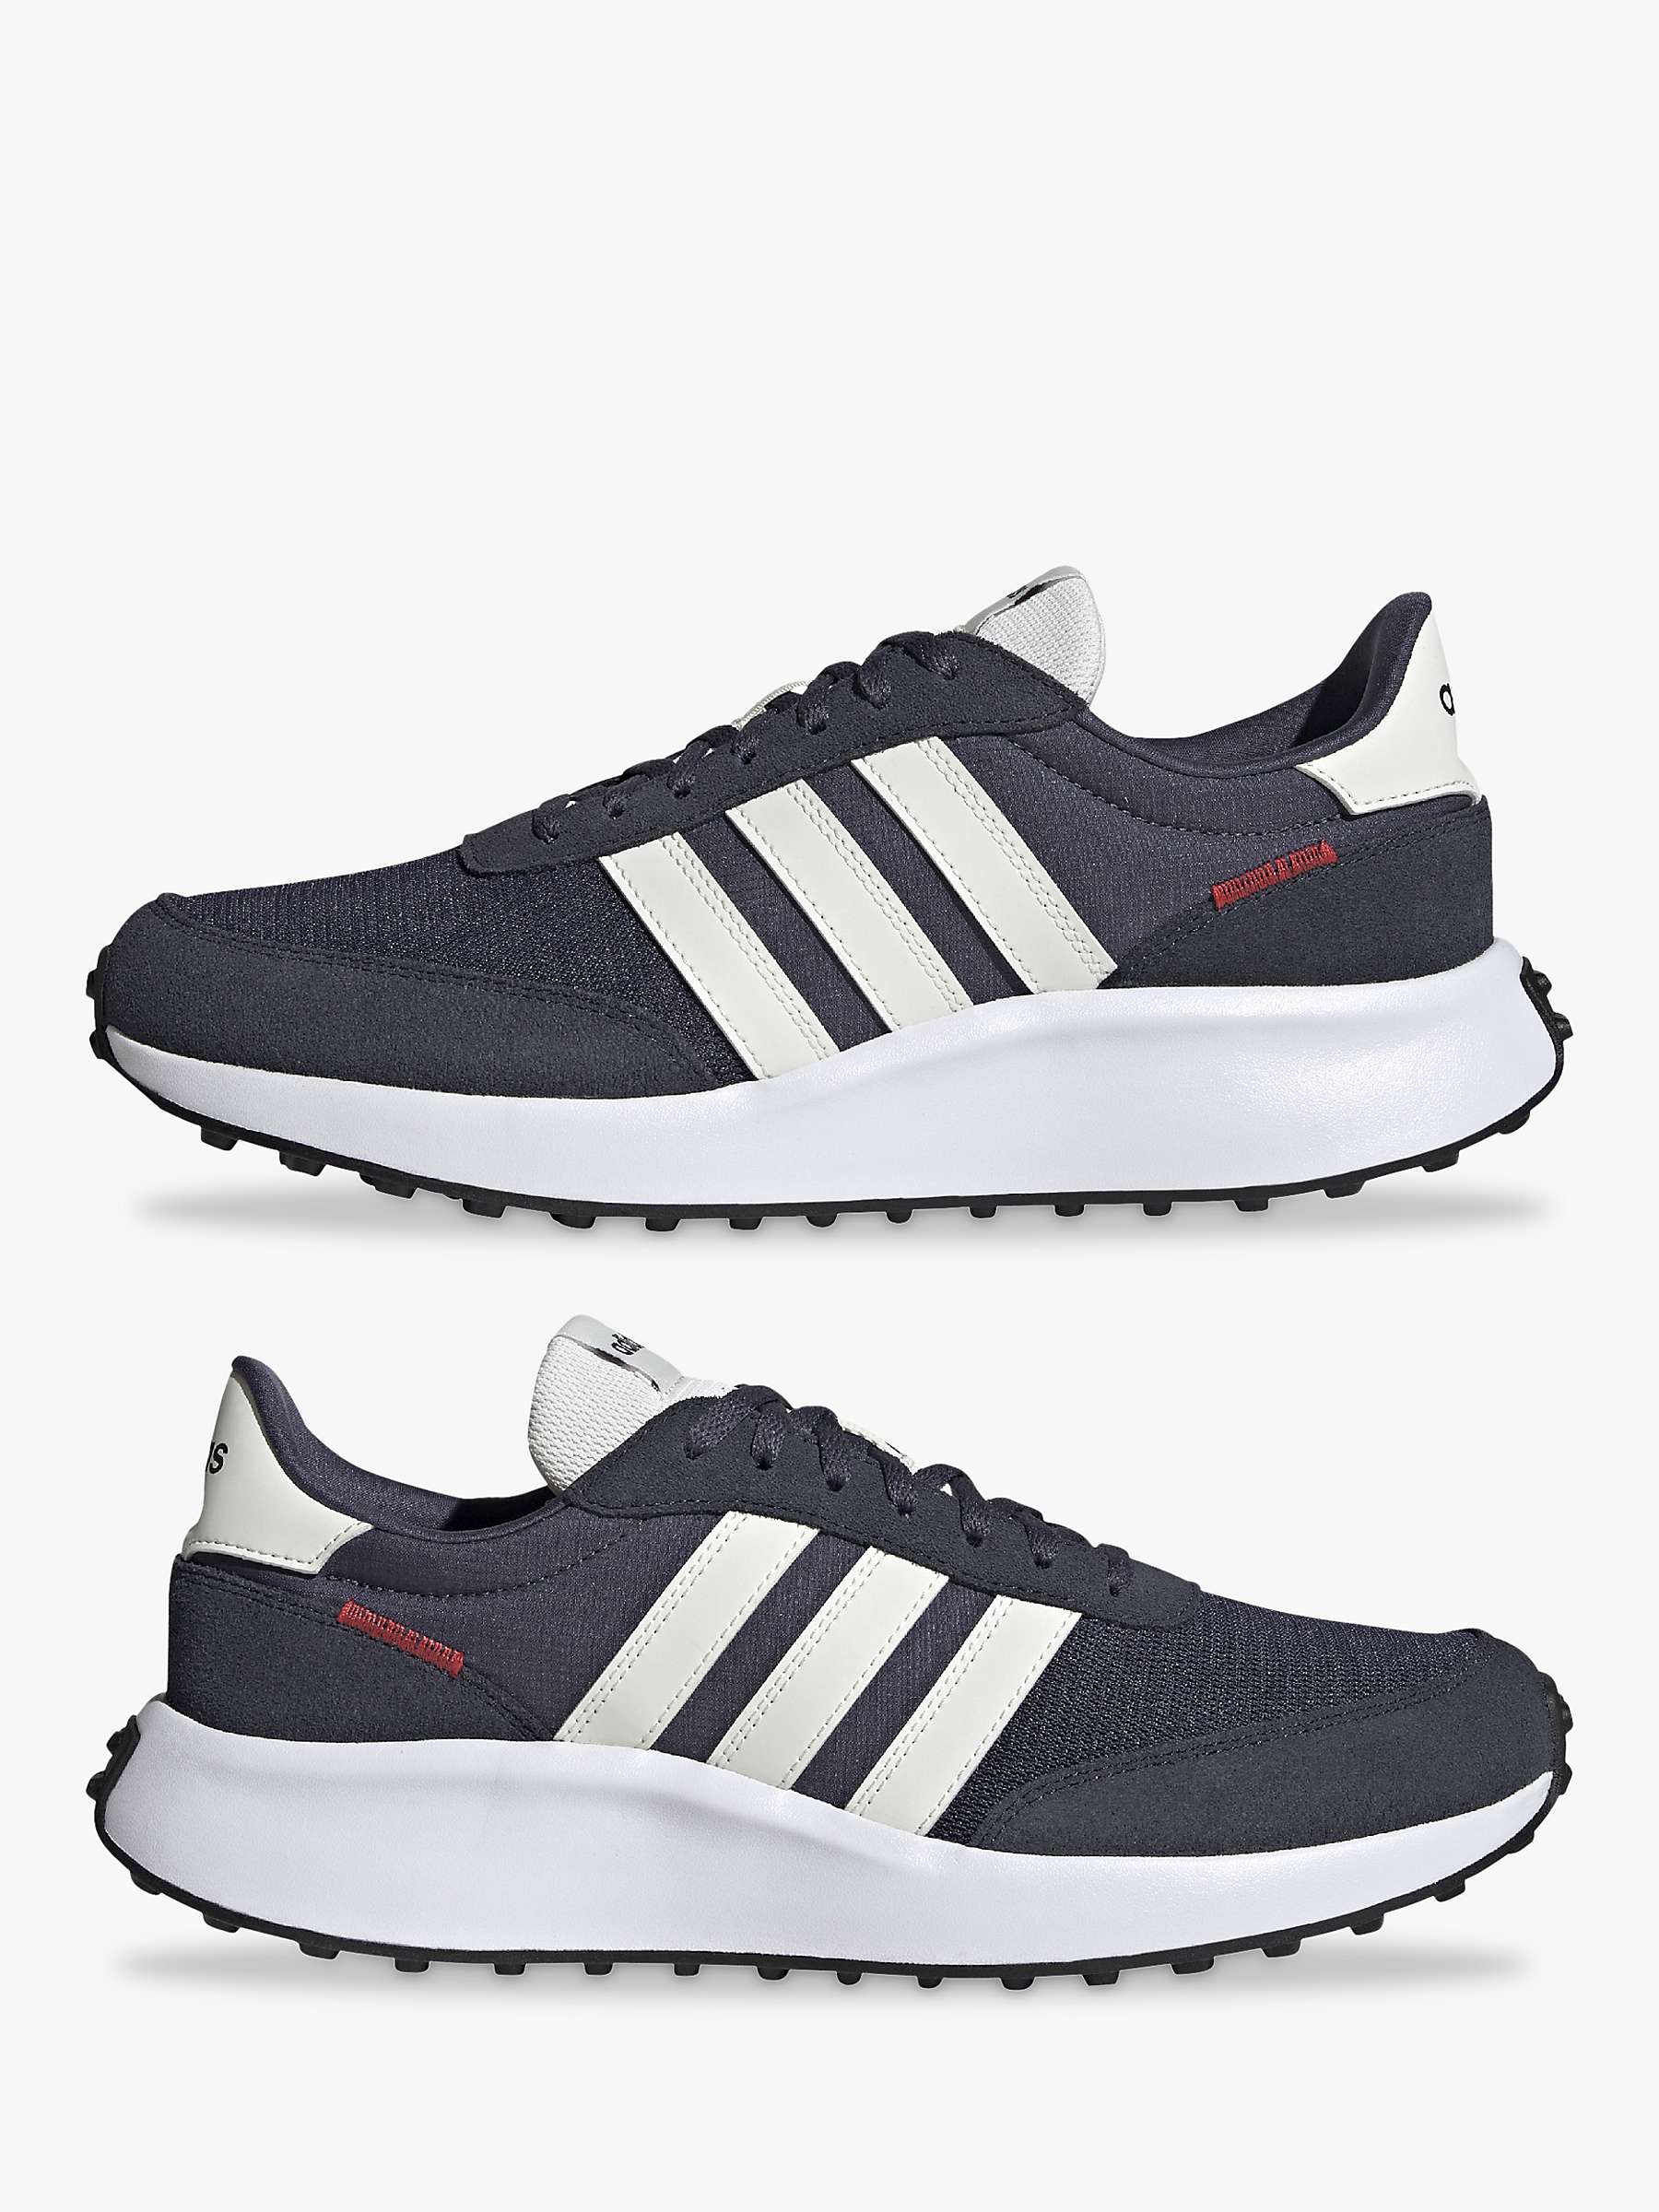 Buy adidas Run 70s Lifestyle Running Shoes Online at johnlewis.com